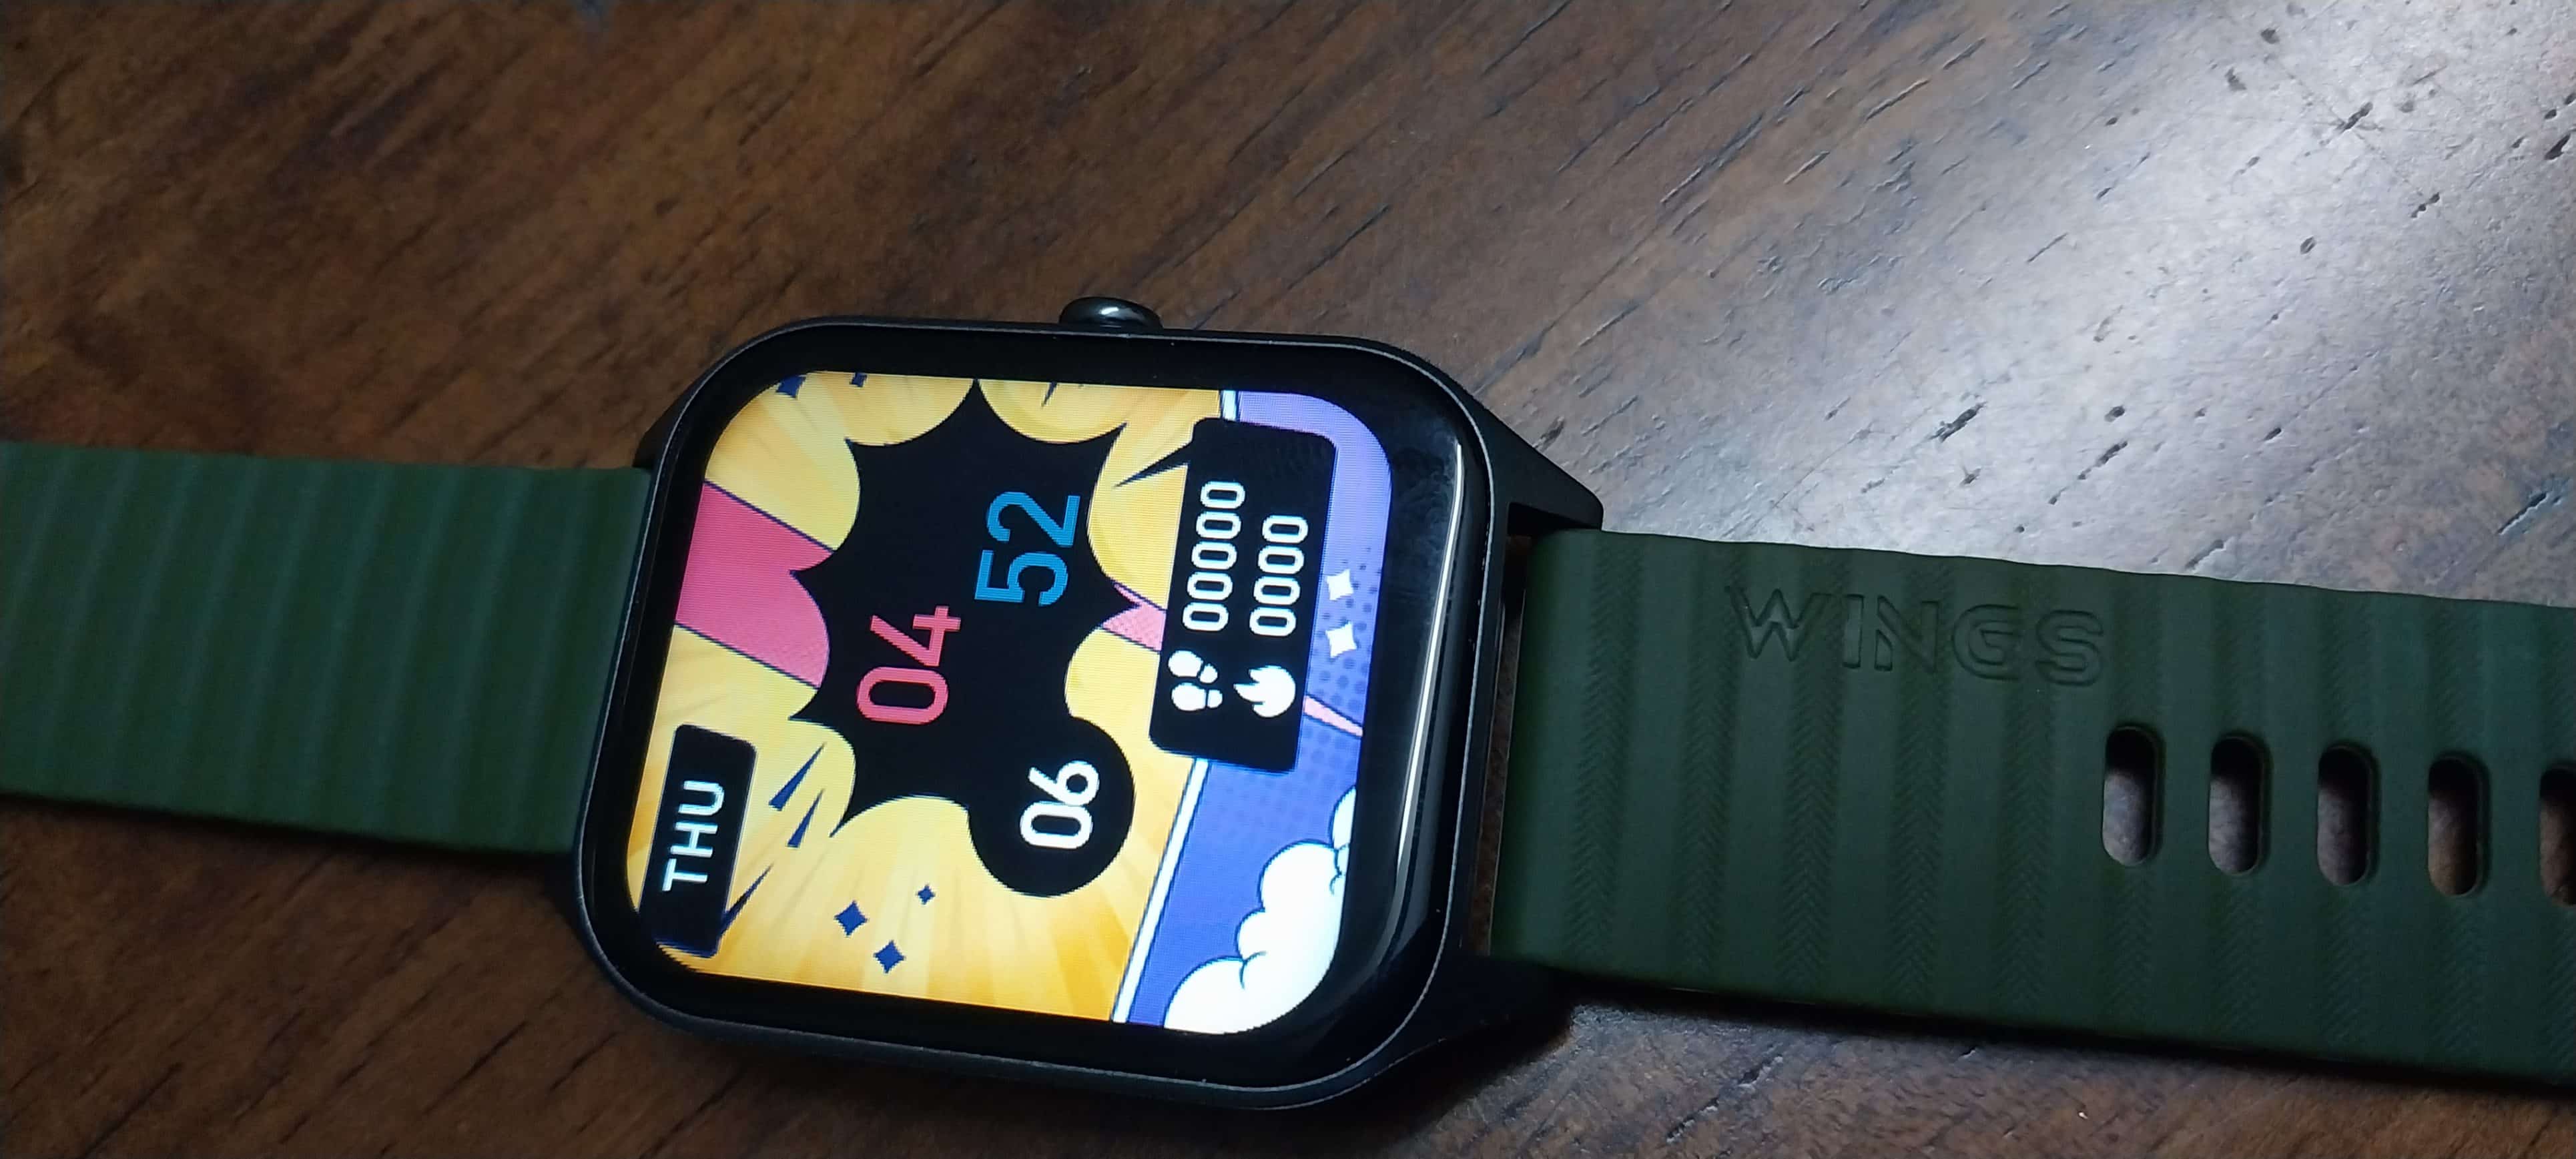 Wings Prime Smartwatch - Key Features